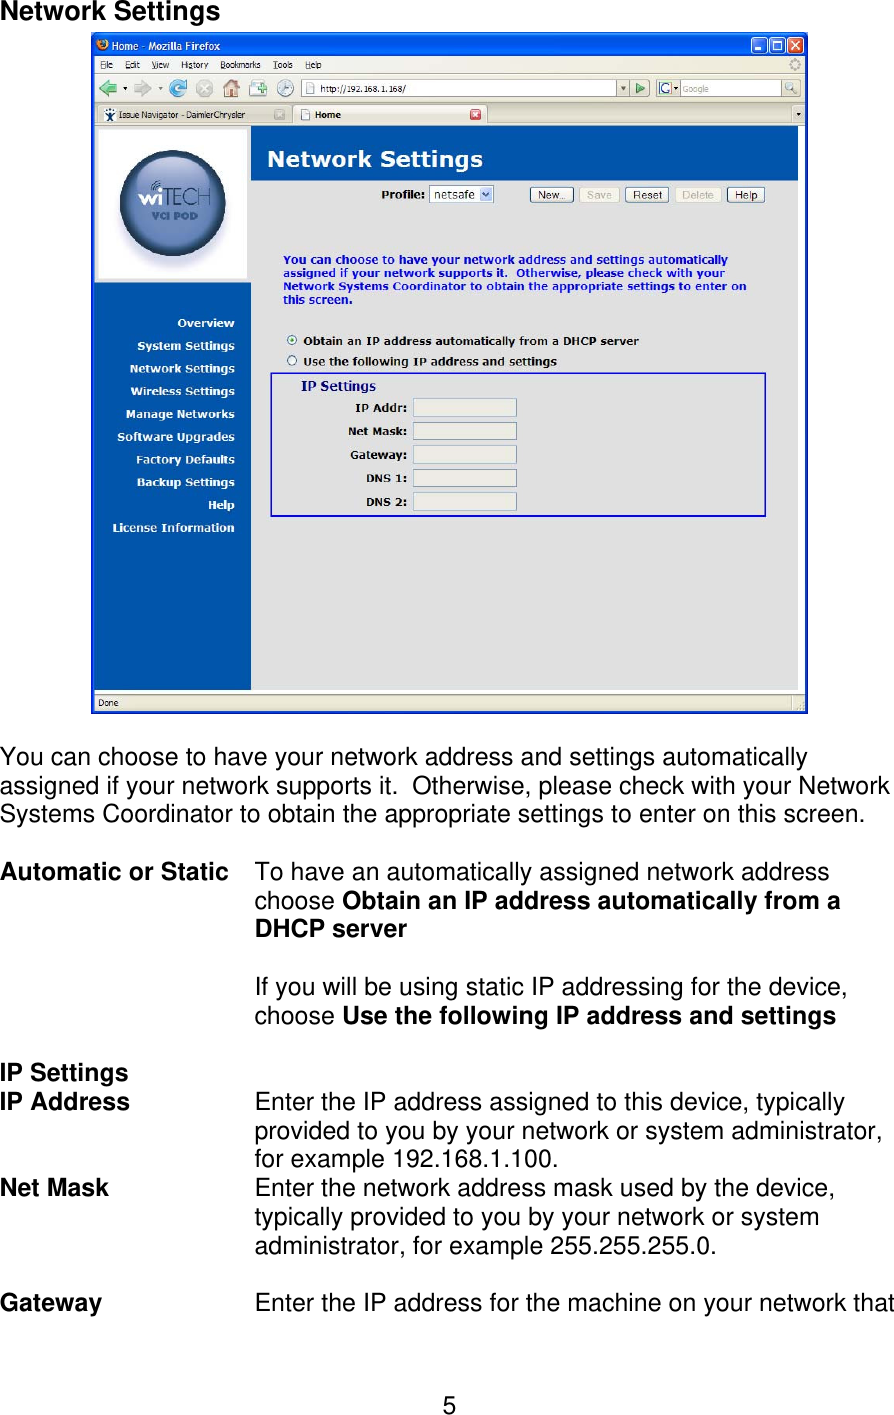   5Network Settings   You can choose to have your network address and settings automatically assigned if your network supports it.  Otherwise, please check with your Network Systems Coordinator to obtain the appropriate settings to enter on this screen.   Automatic or Static To have an automatically assigned network address choose Obtain an IP address automatically from a DHCP server   If you will be using static IP addressing for the device, choose Use the following IP address and settings  IP Settings  IP Address   Enter the IP address assigned to this device, typically provided to you by your network or system administrator, for example 192.168.1.100. Net Mask   Enter the network address mask used by the device, typically provided to you by your network or system administrator, for example 255.255.255.0.  Gateway    Enter the IP address for the machine on your network that 